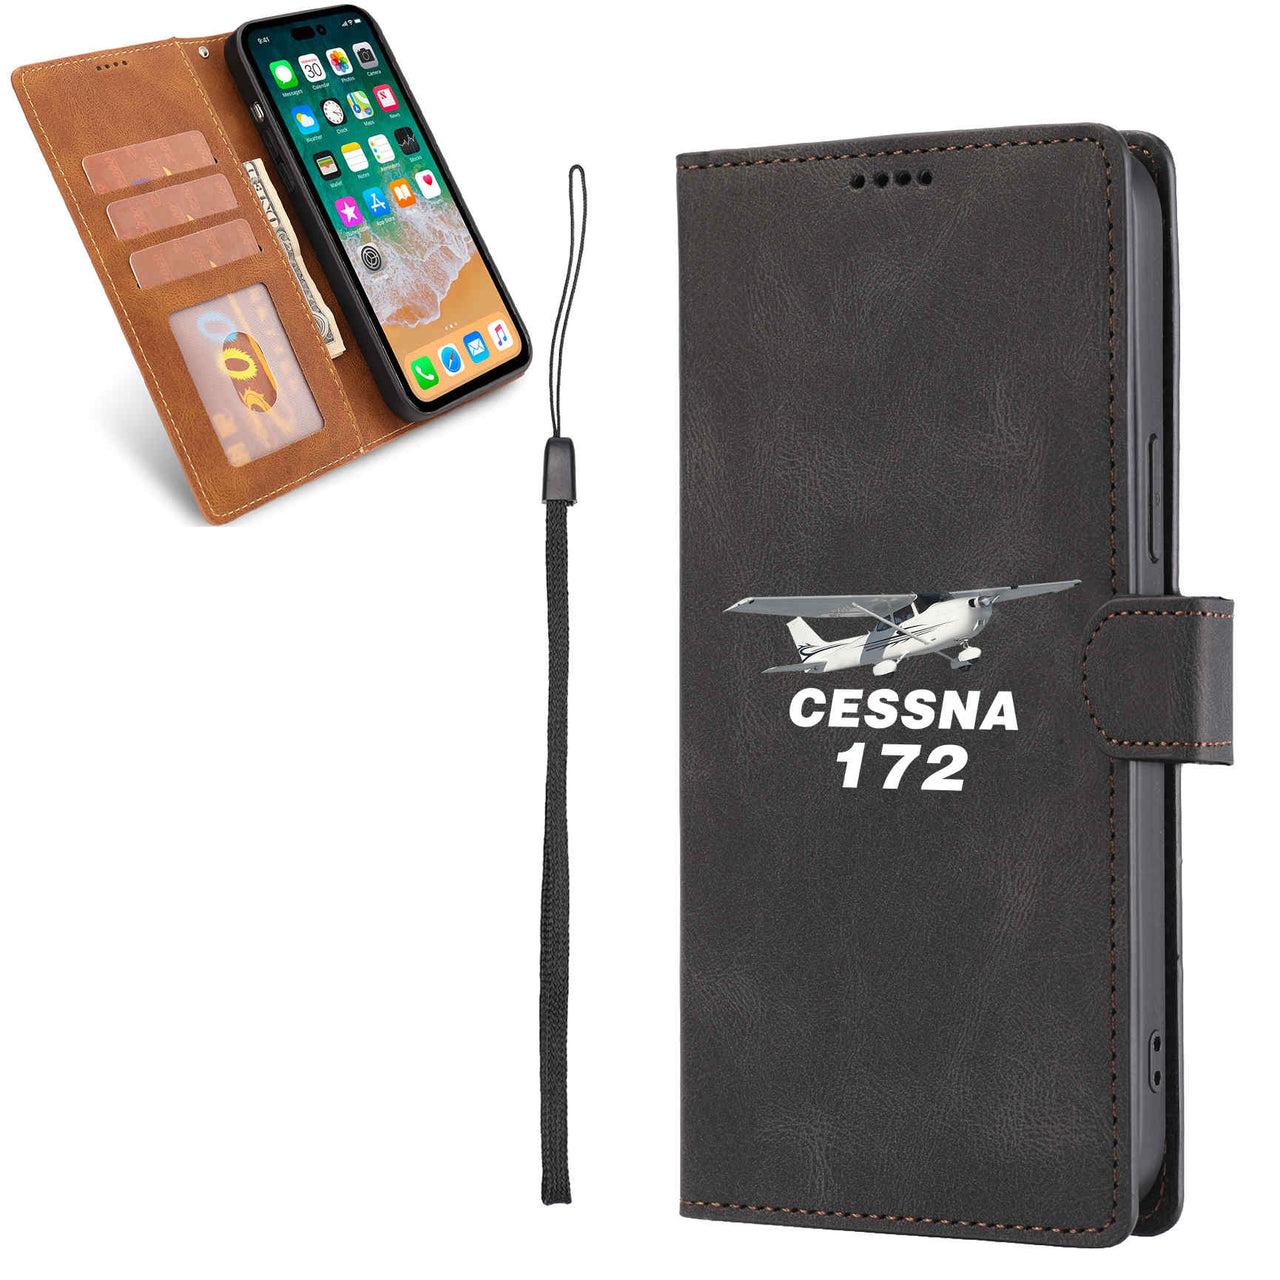 The Cessna 172 Designed Leather Samsung S & Note Cases